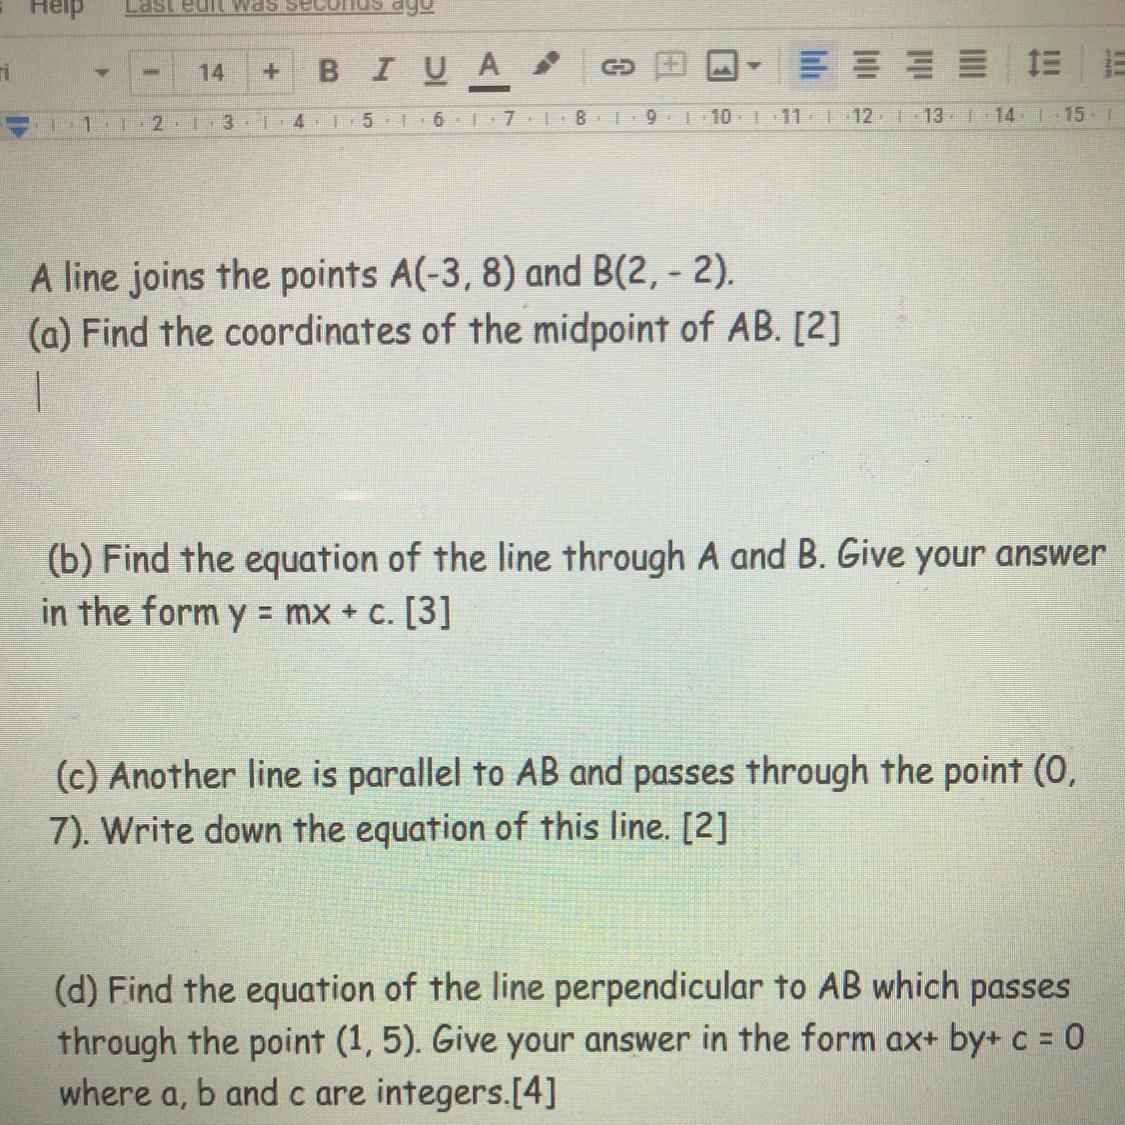 HELP MATH HW URGENT!!!! Ill Give Branliest To Whoever Can Solve One At Least!!